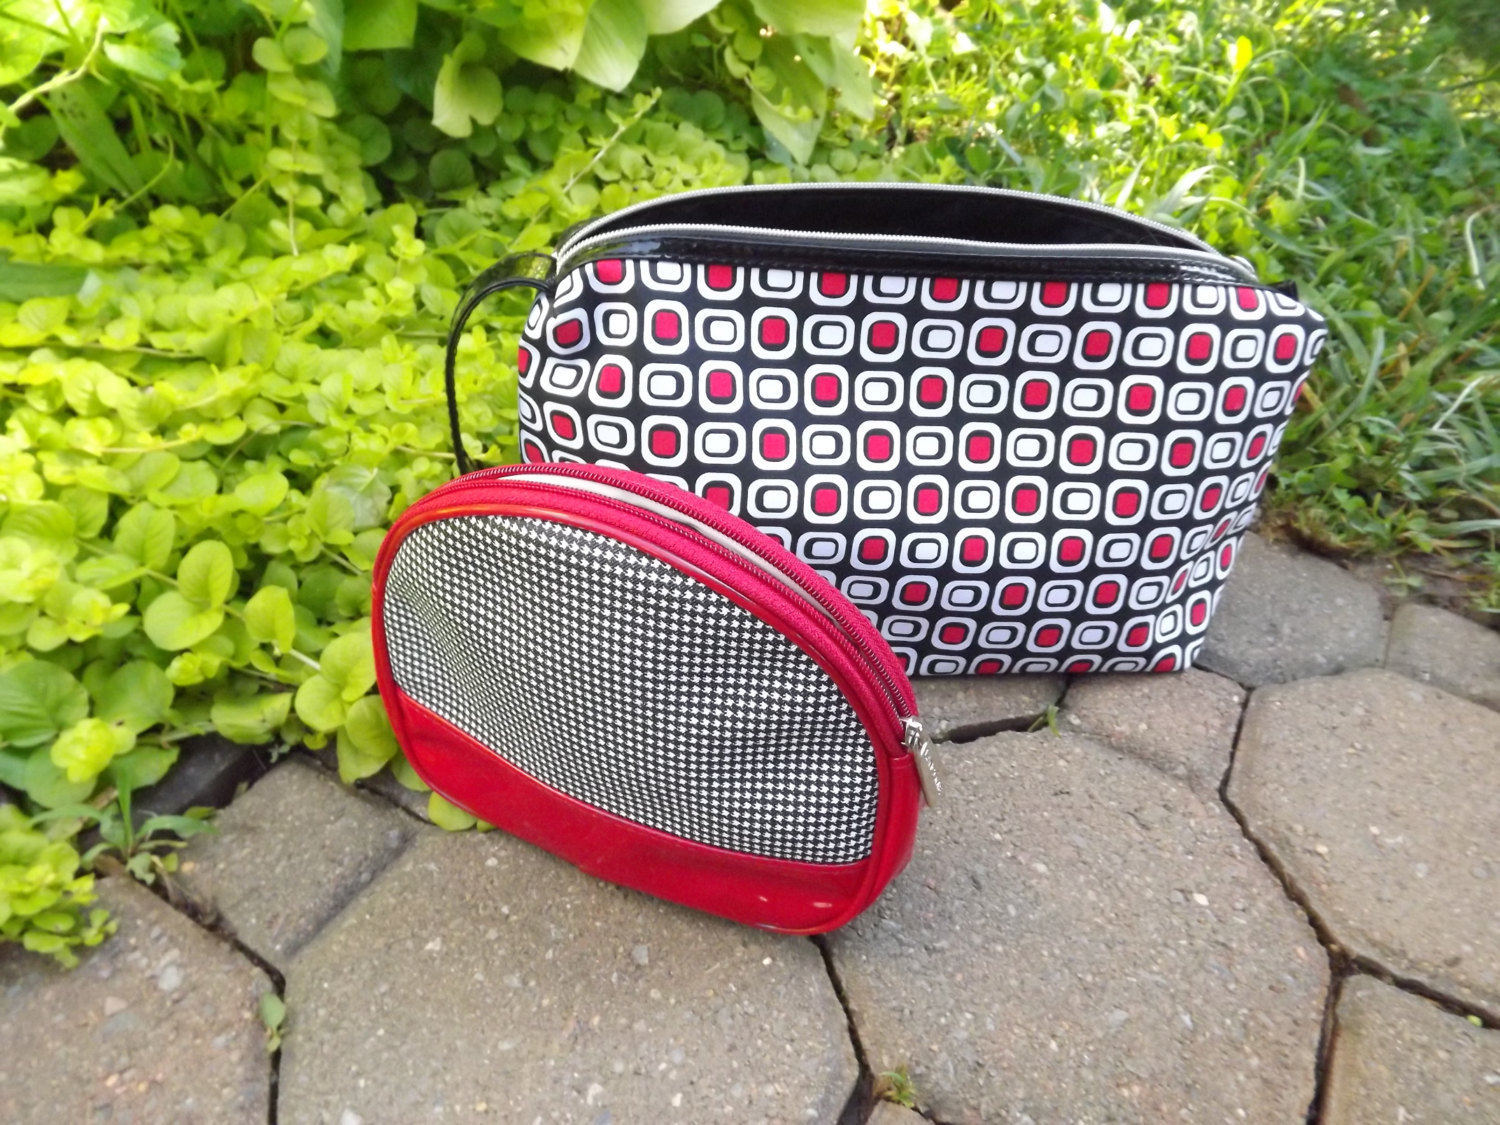 Cosmetic Bags Large Geometric Lancome Makeup Case Retro Red Black Zipper Pouch - $23.00